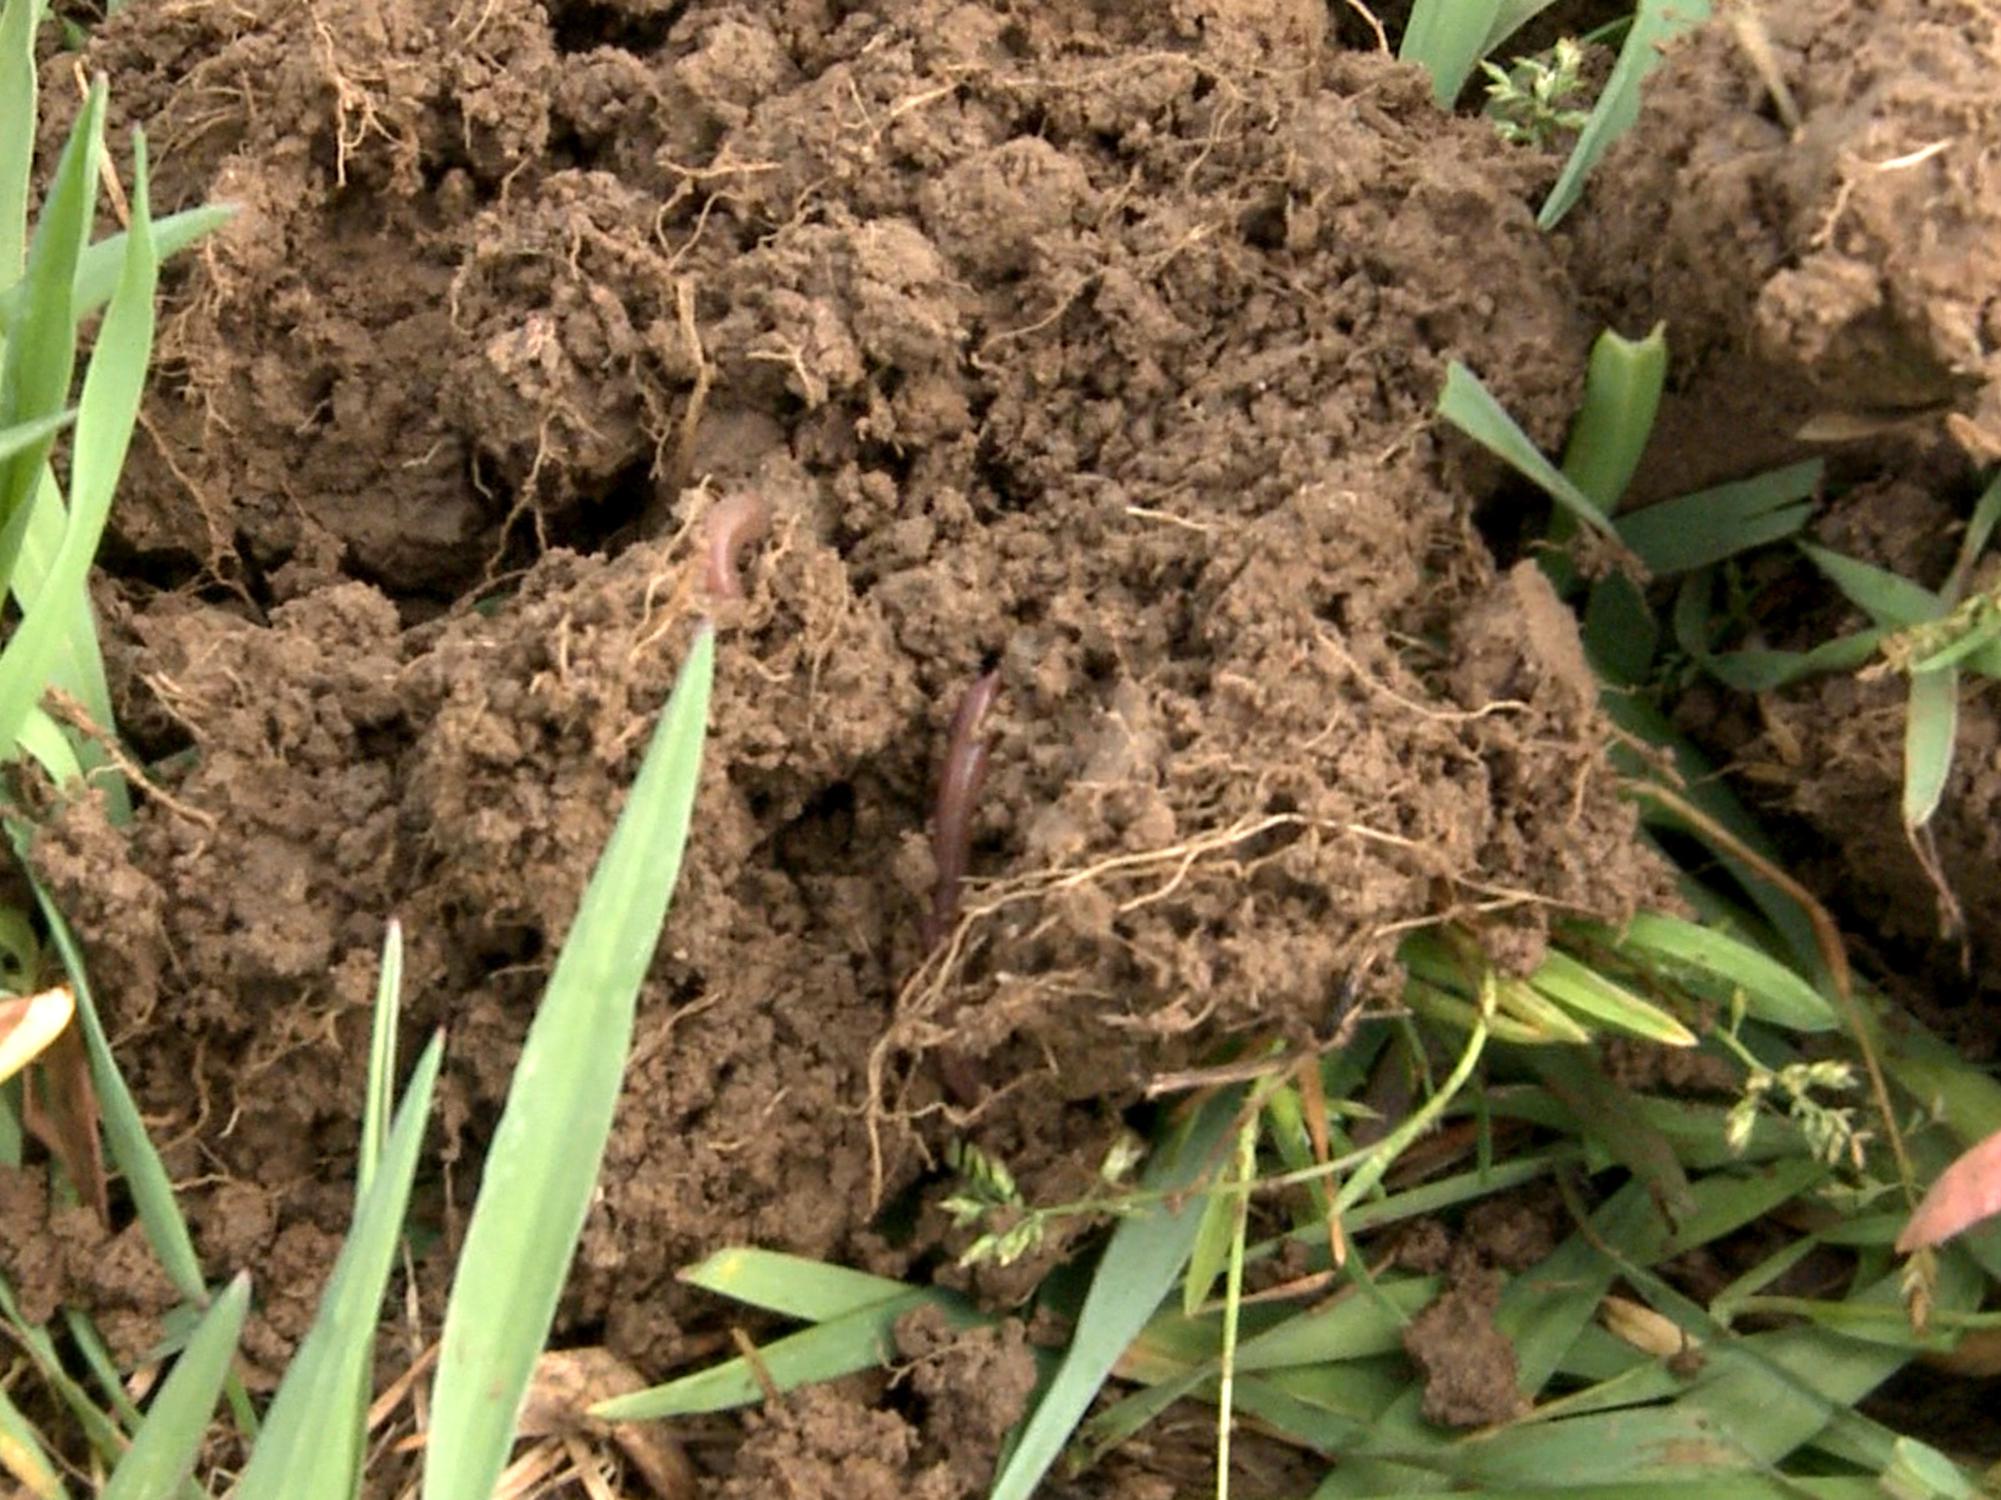 Fresh, dark soil with a large earthworm in the middle.